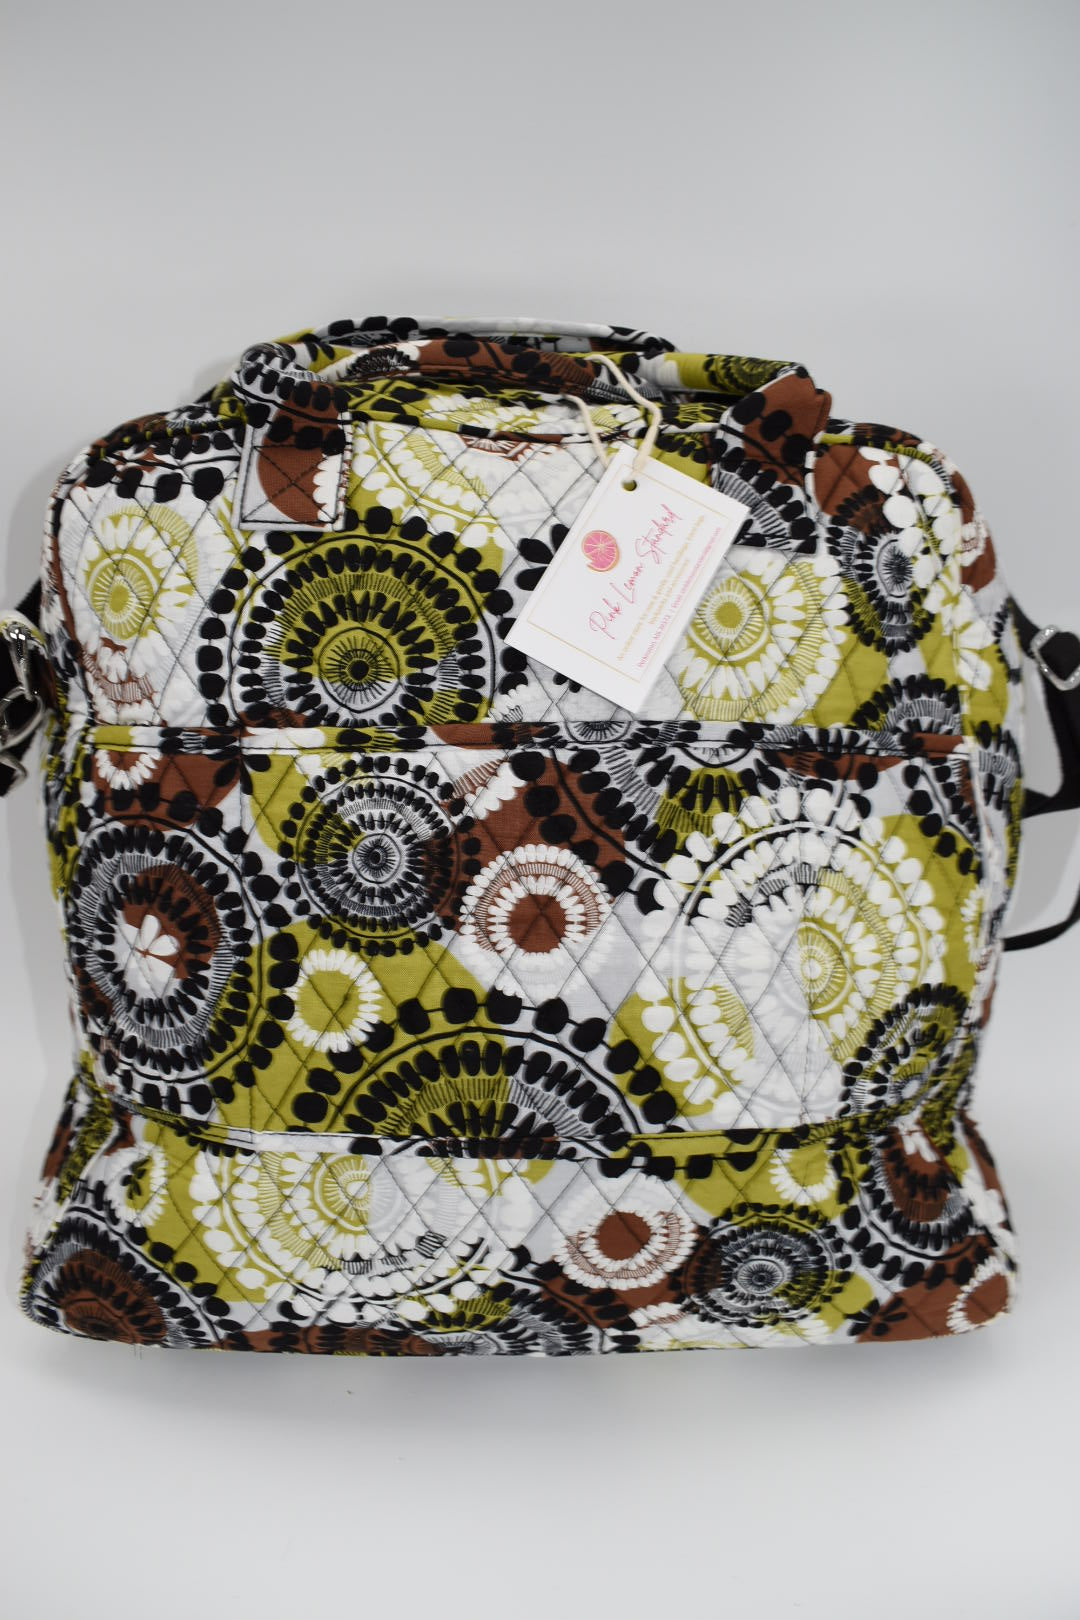 Vera Bradley Large Travel Bag in "Cocoa Moss" Pattern